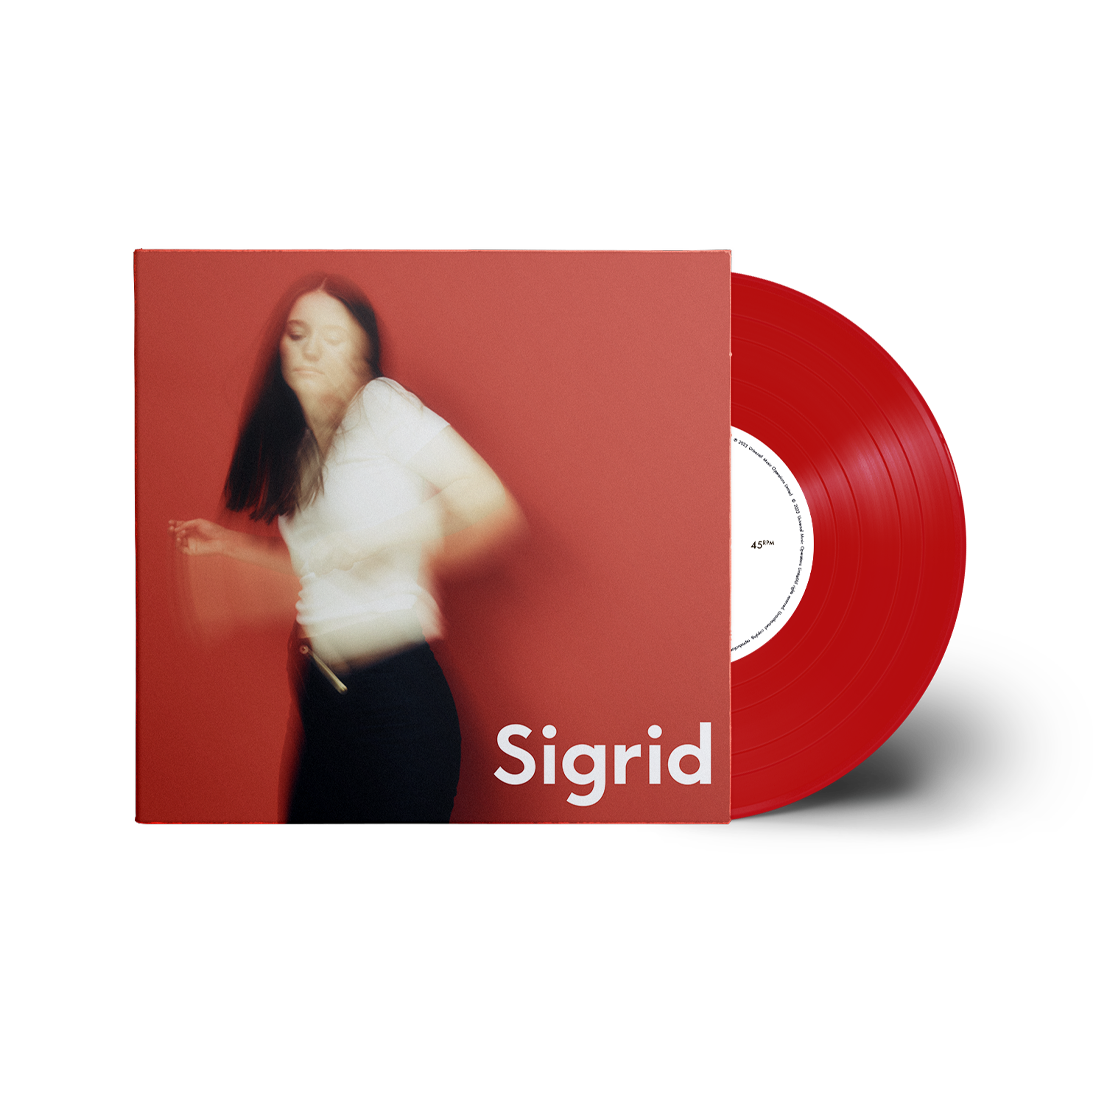 Sigrid - THE HYPE EP: LIMITED 10" RED VINYL